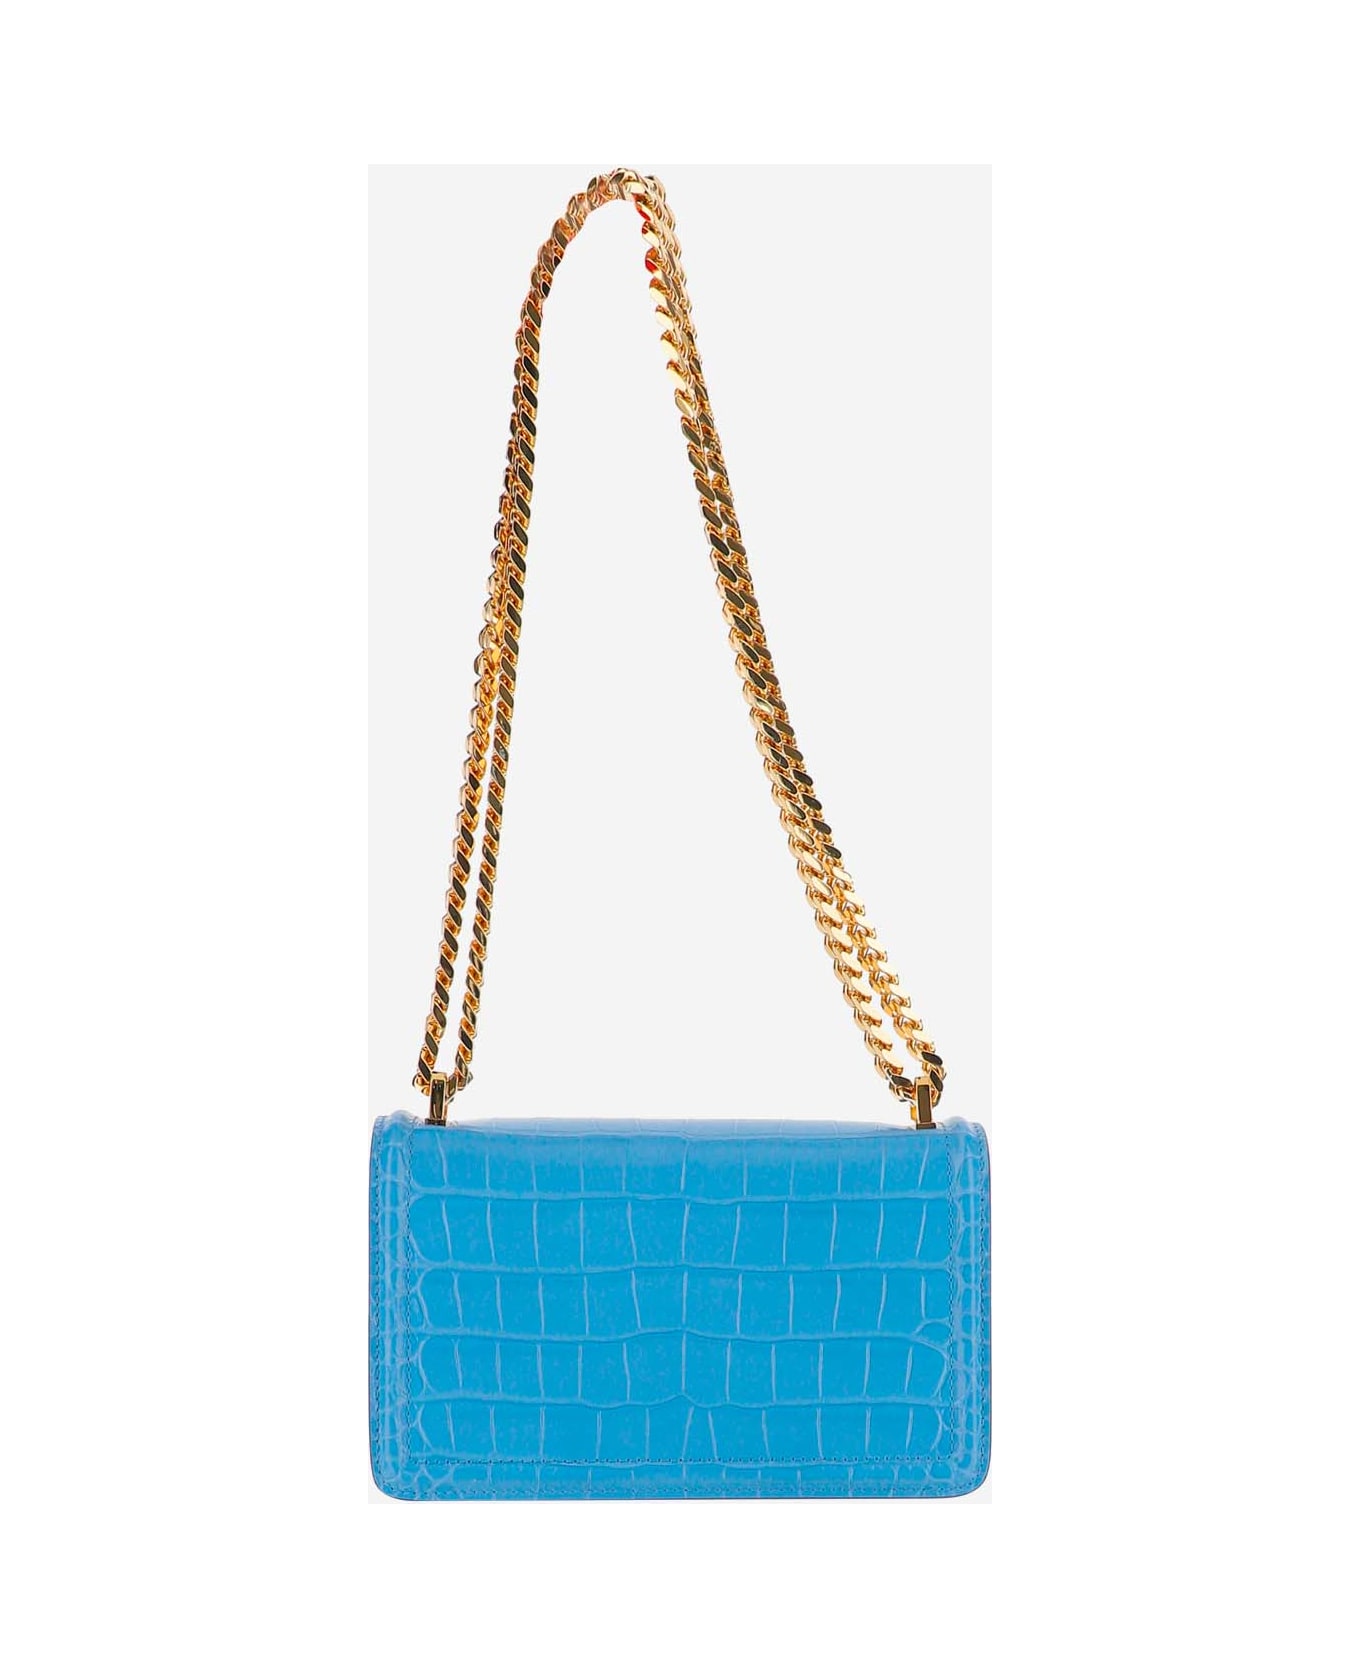 Burberry Mini Tb Embossed Leather Bag With Chain Strap - Clear Blue ショルダーバッグ